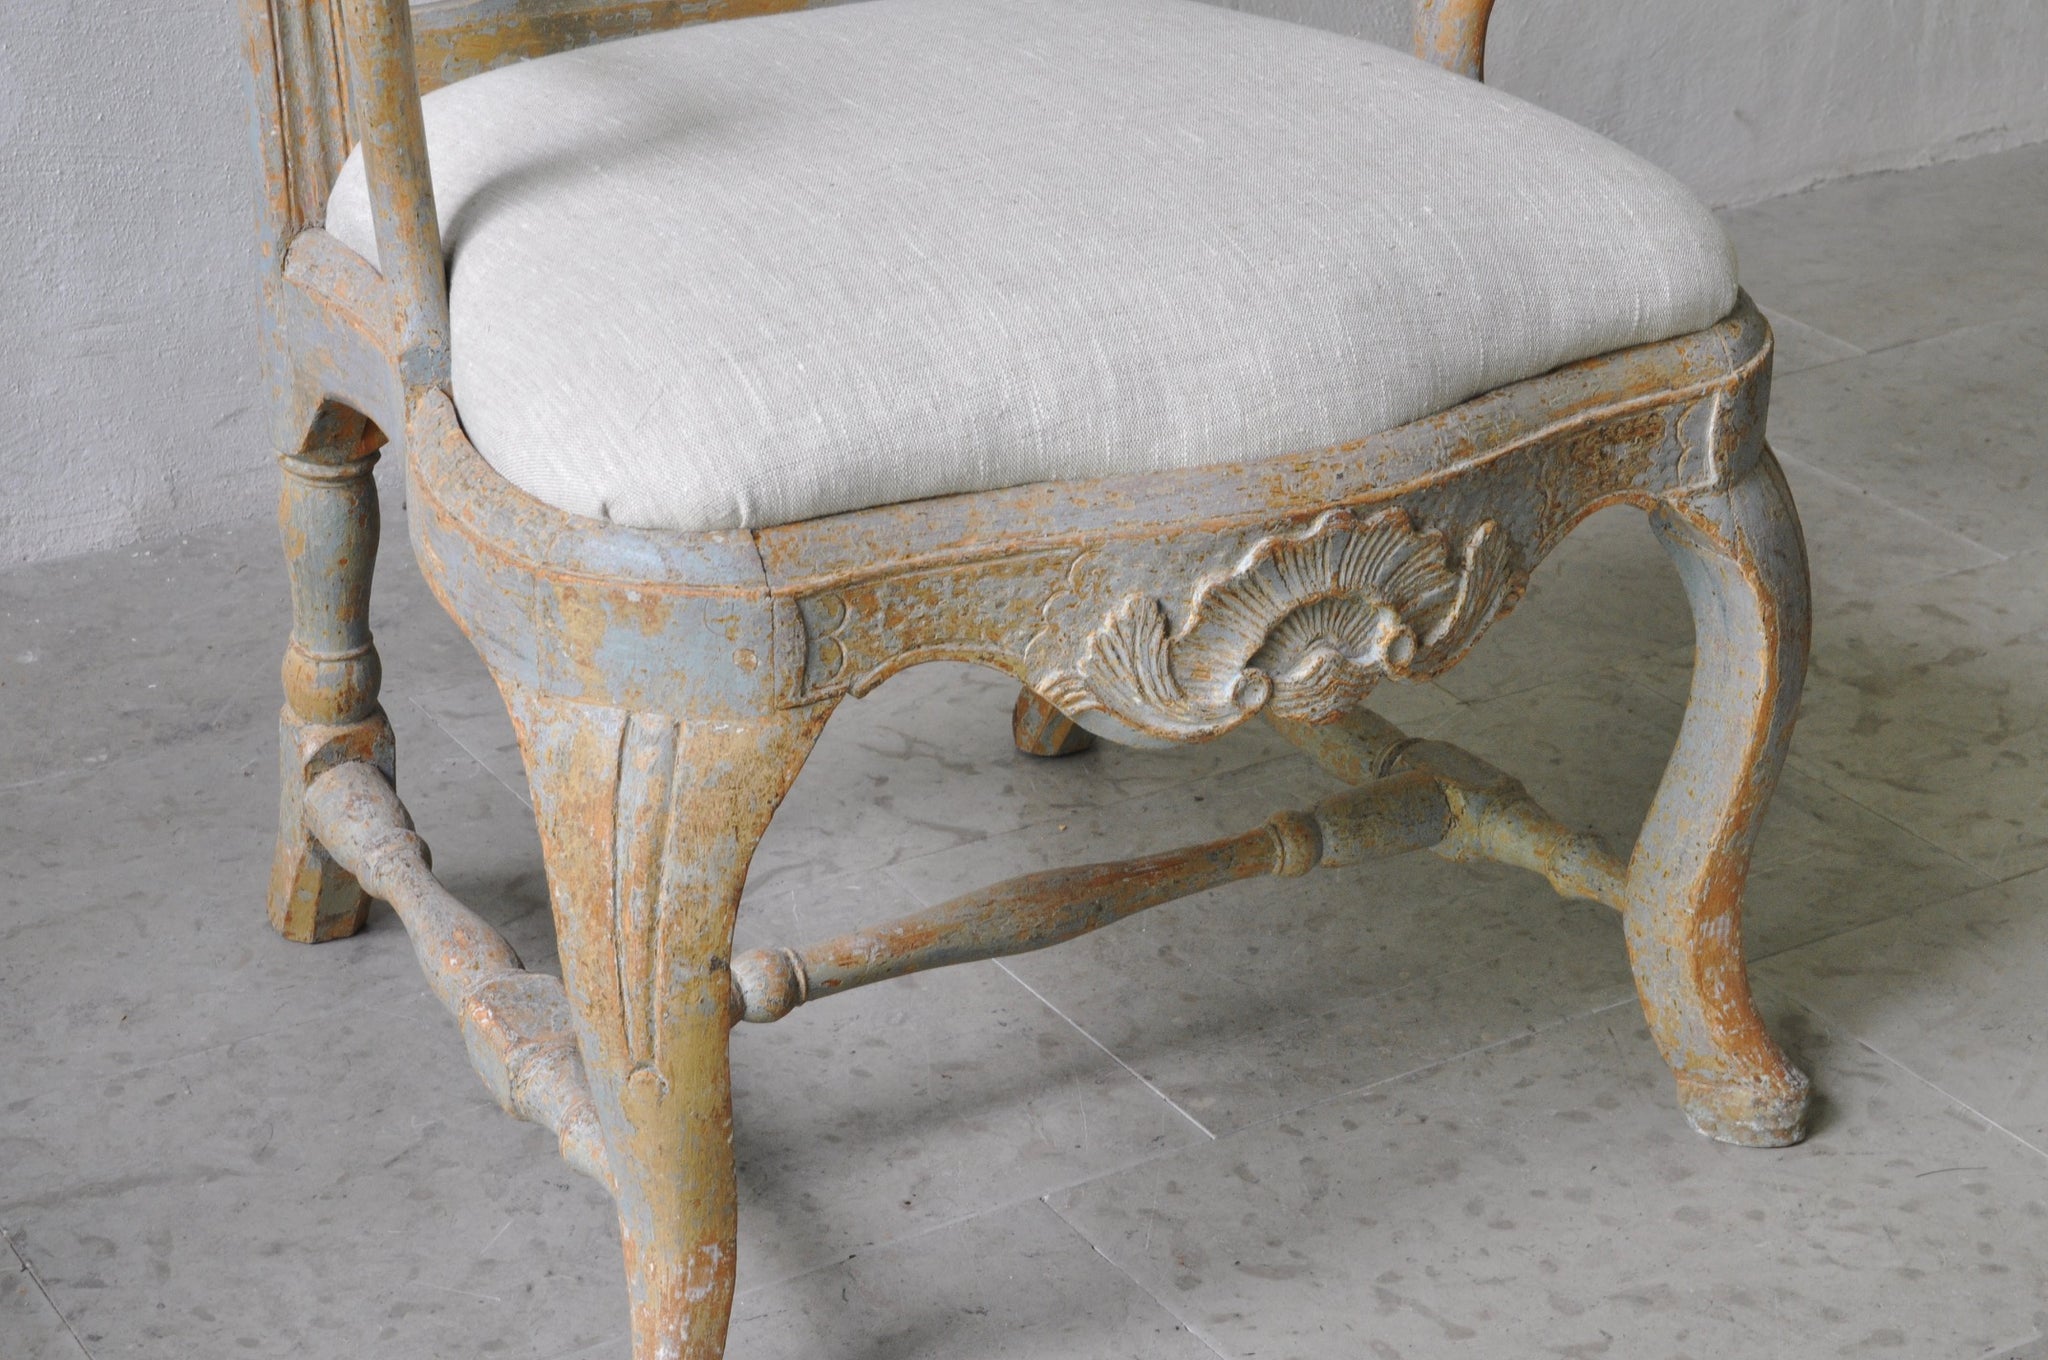 Pair of Rococo Arm Chairs